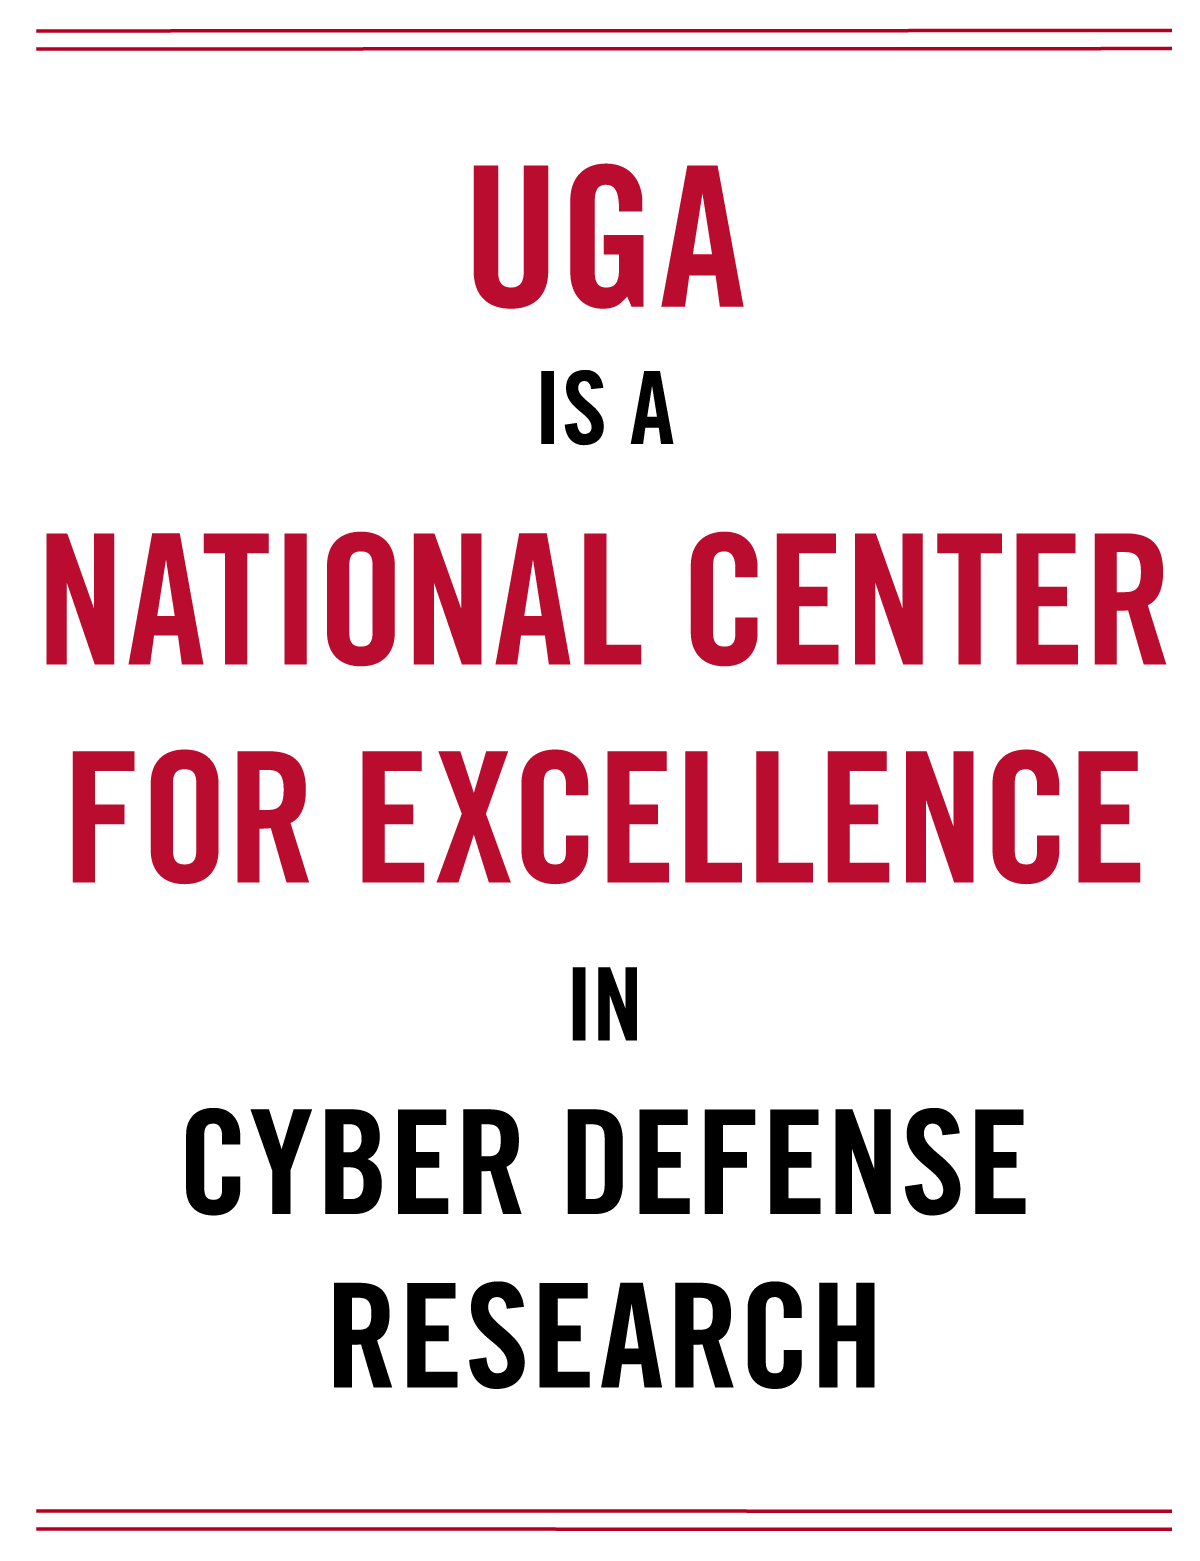 UGA is a National Center for excellence in cyber defense research